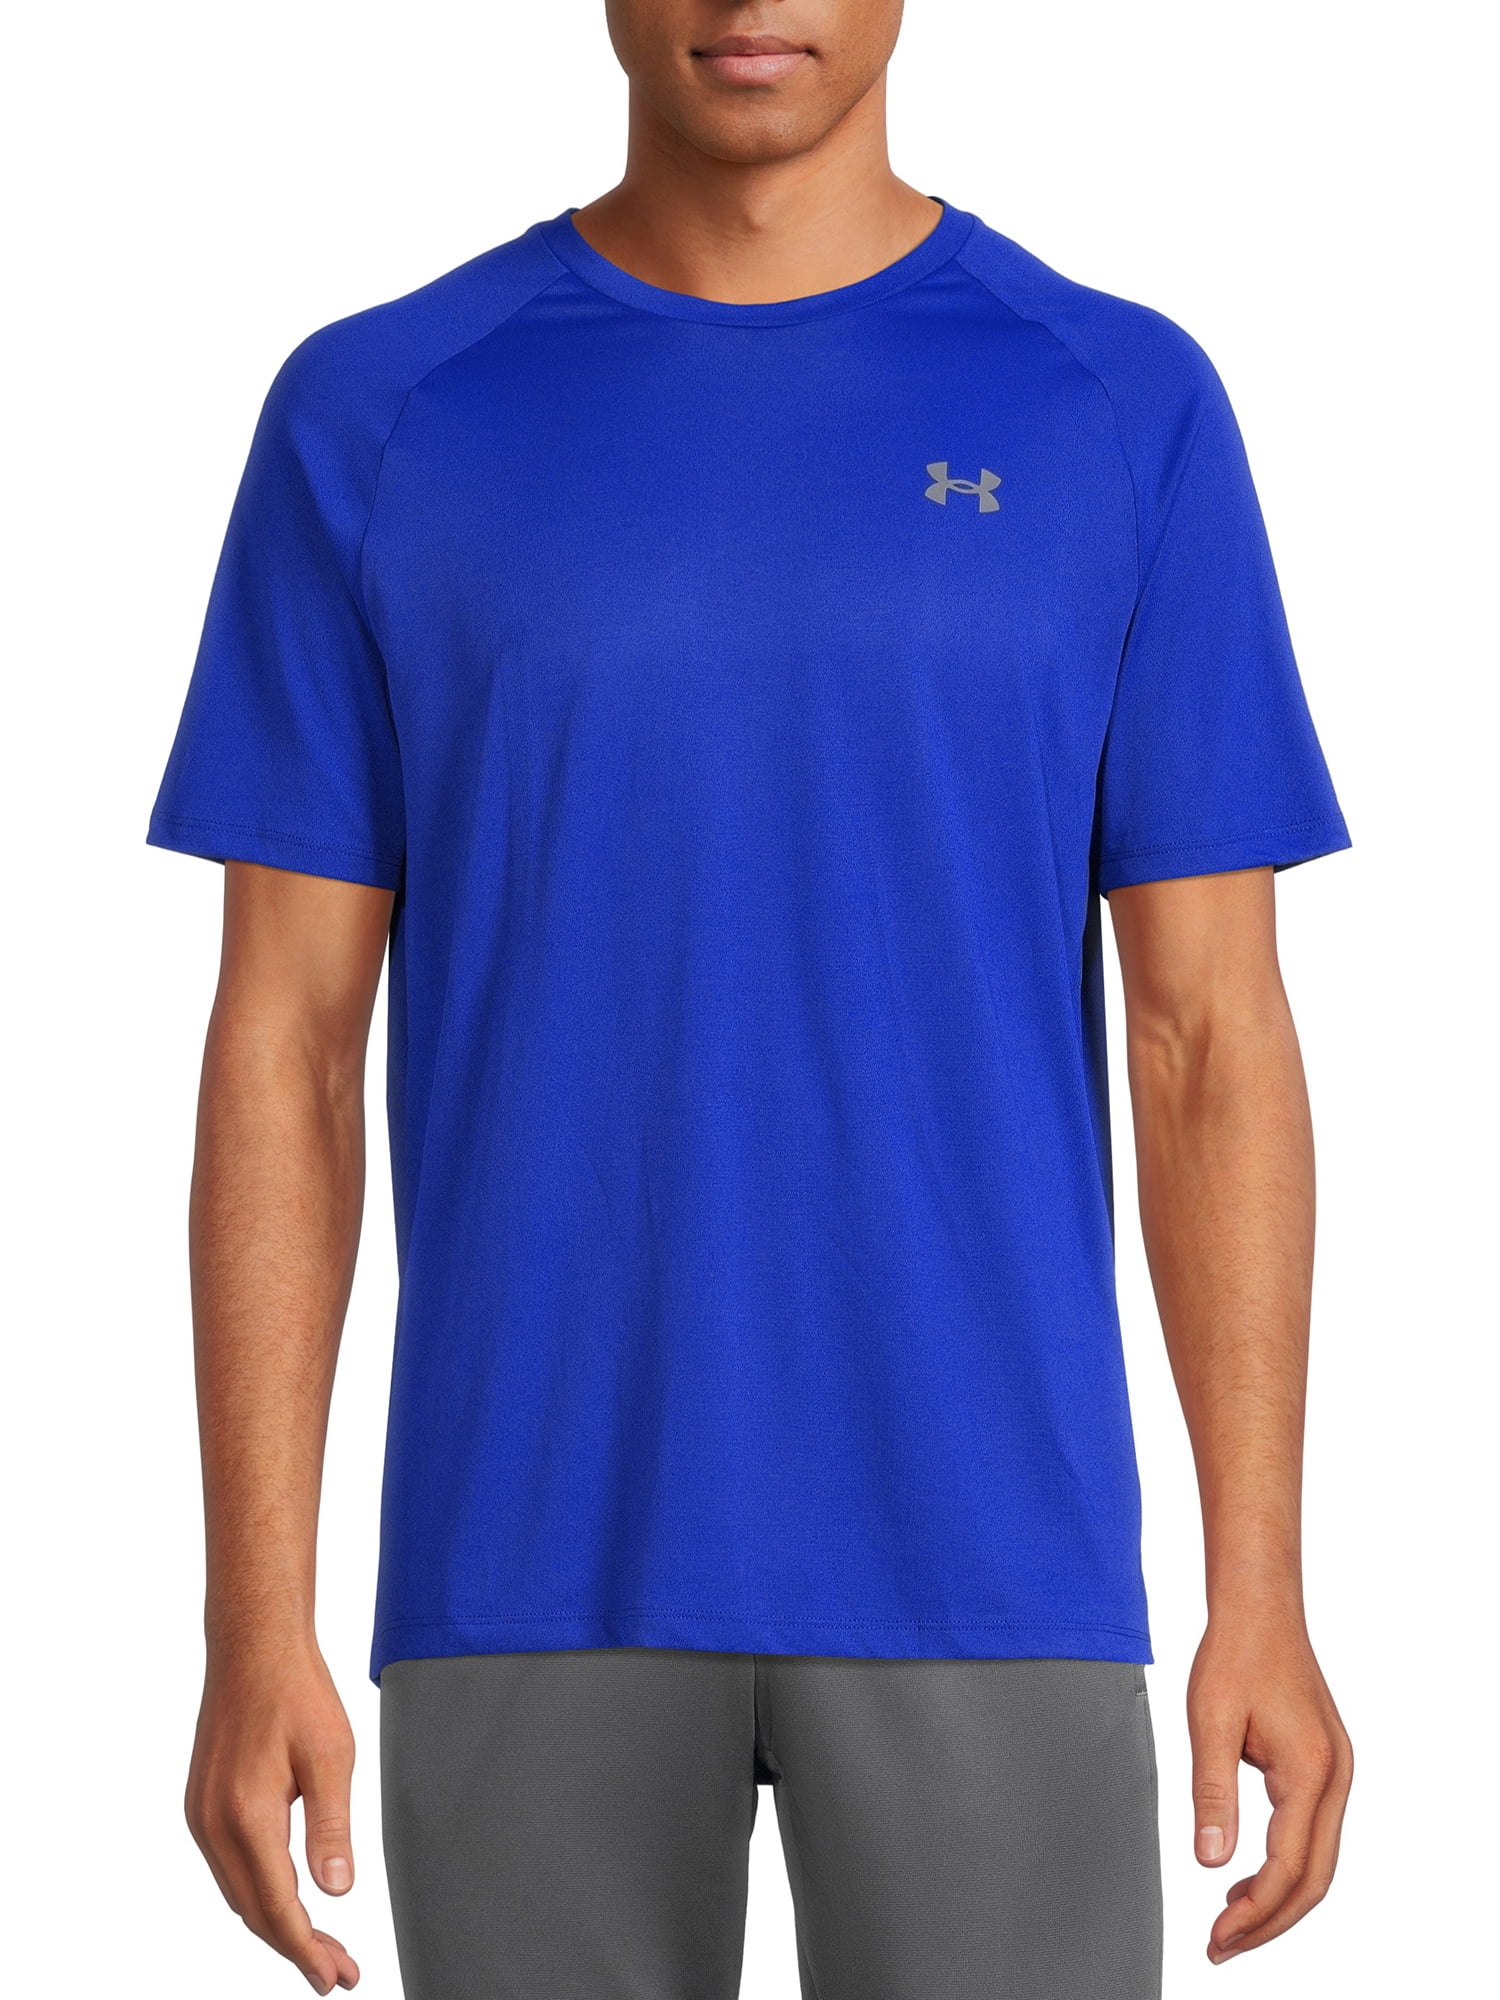 Under Armour Mens T-Shirts